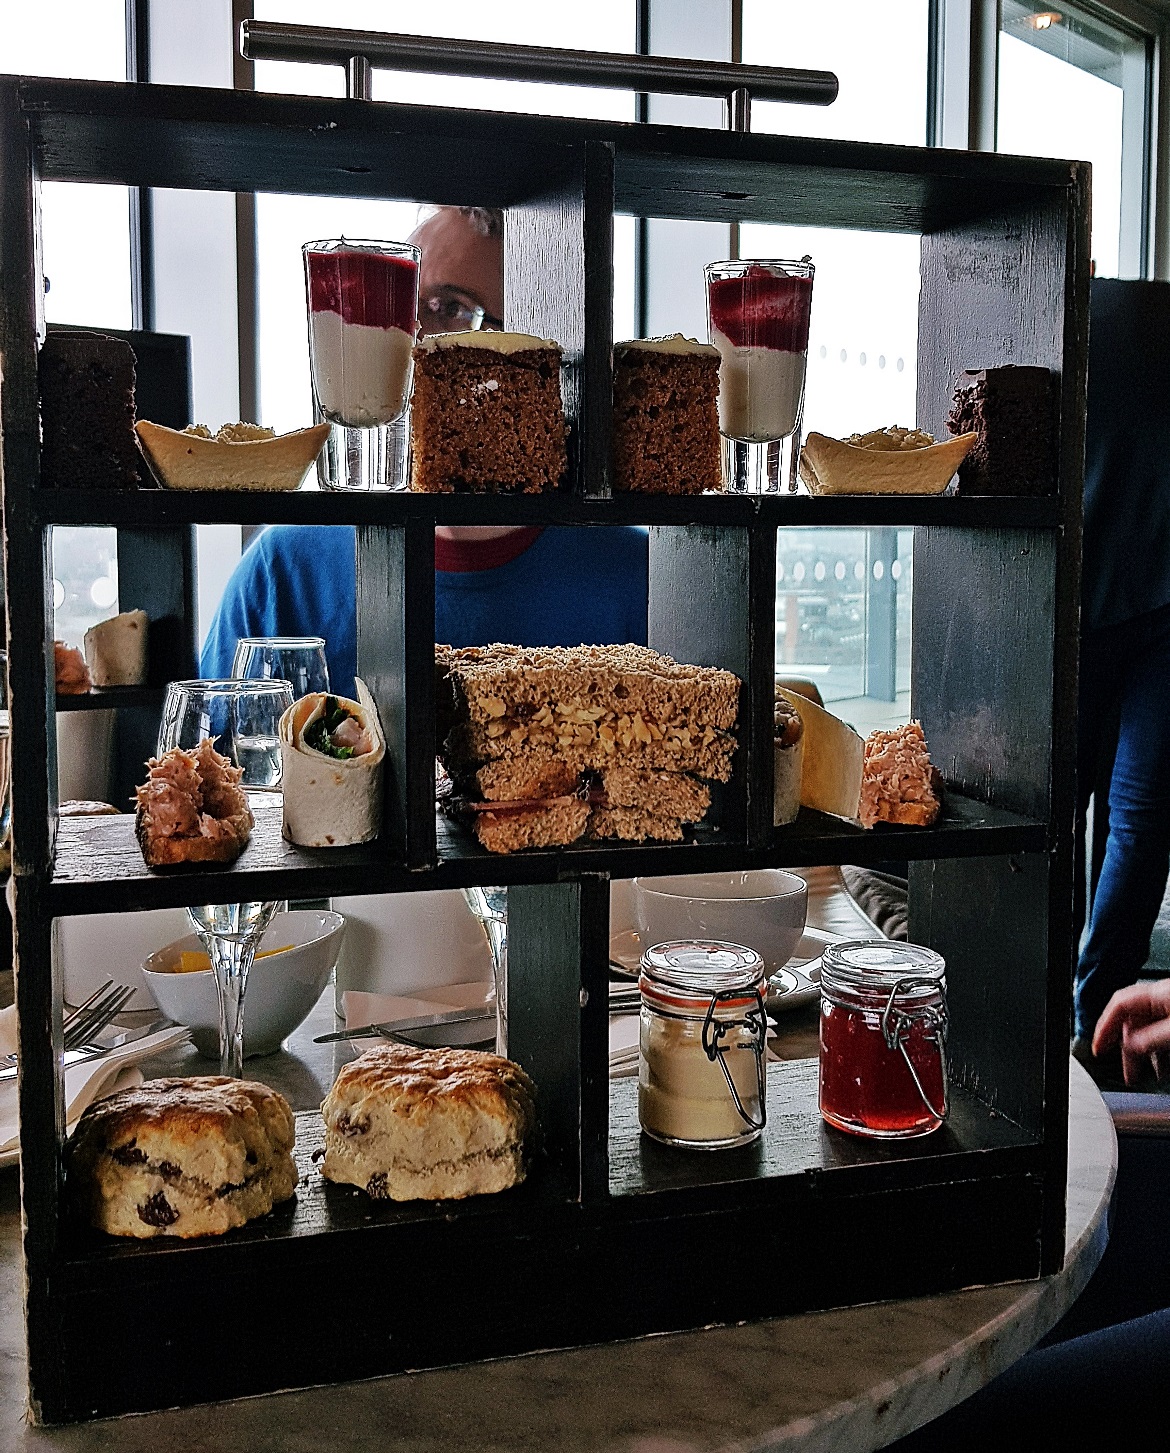 Afternoon Tea at Sky Lounge - March 2018 Monthly Recap by BeckyBecky Blogs